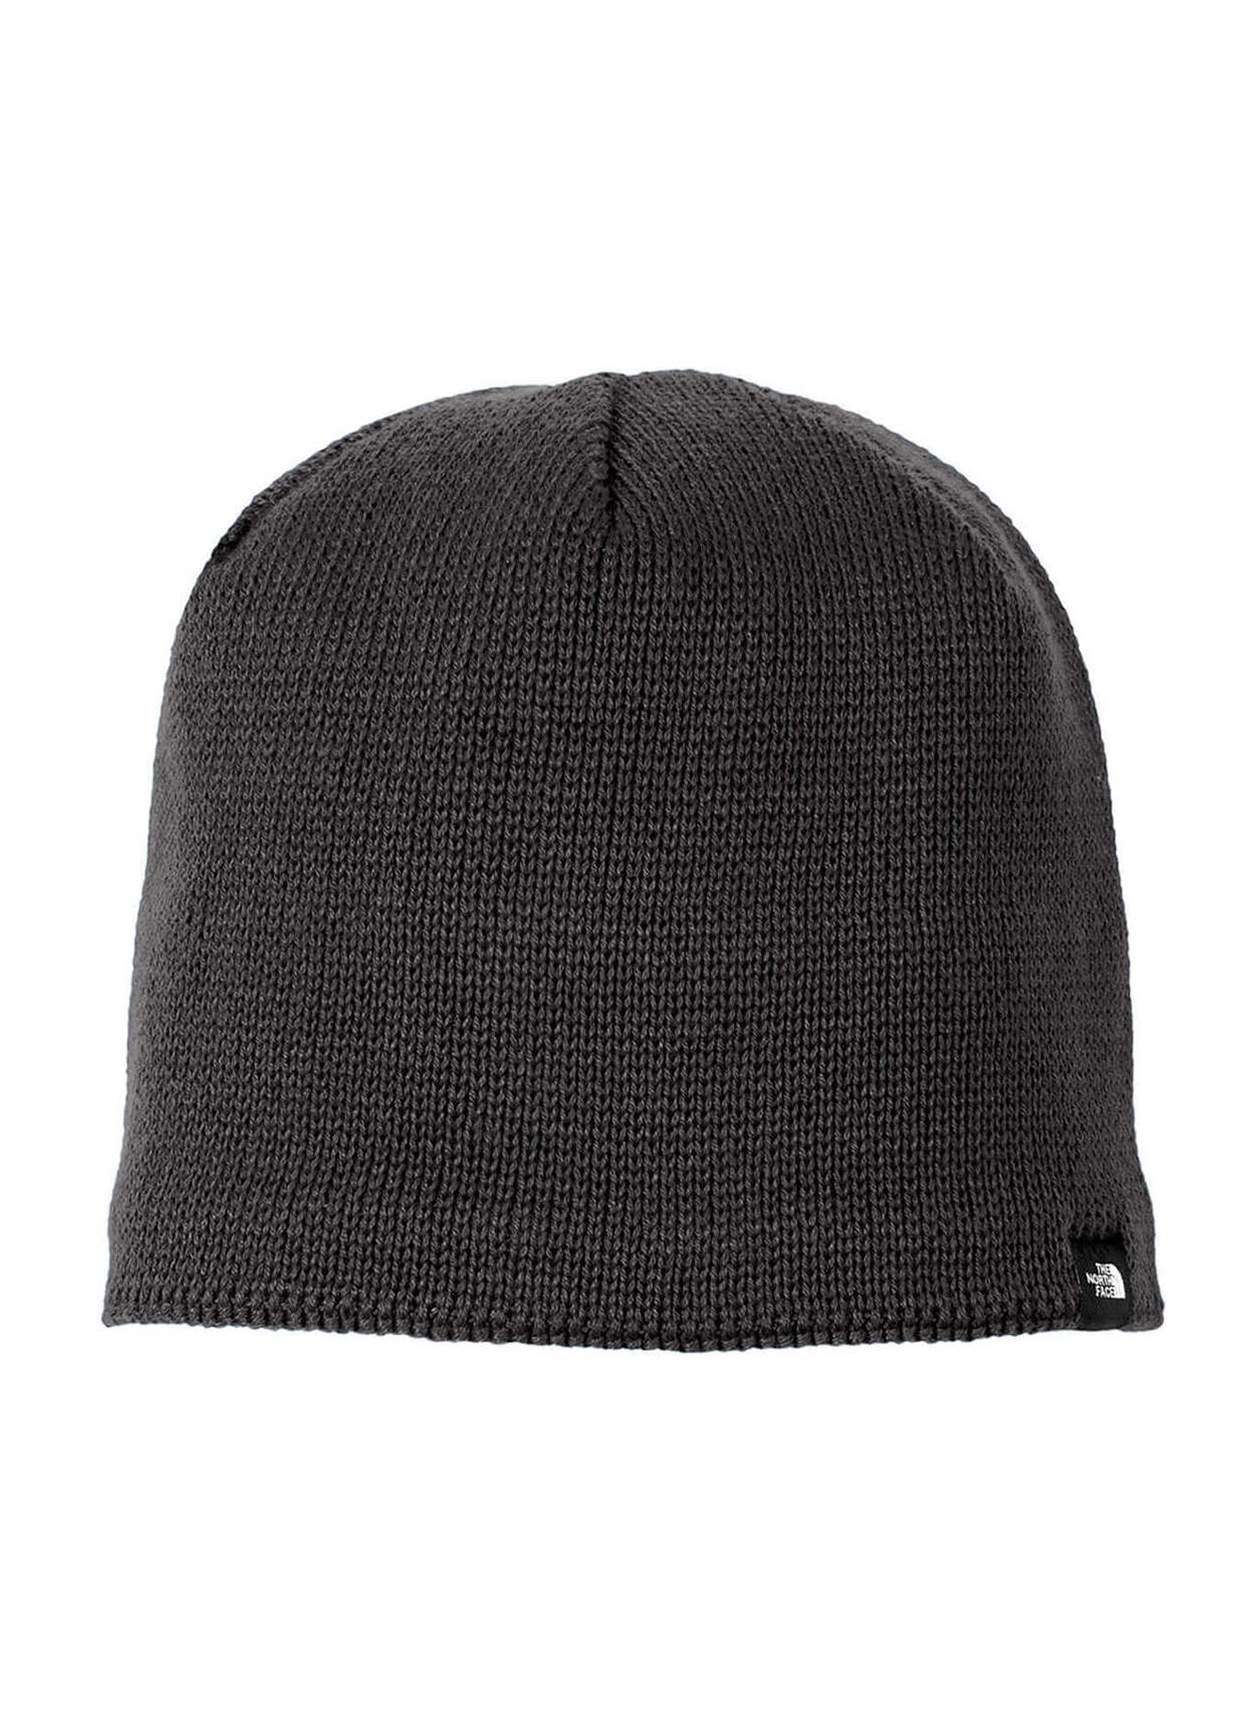 TNF Dark Face The Beanie North Face Heather Mountain | North The Grey